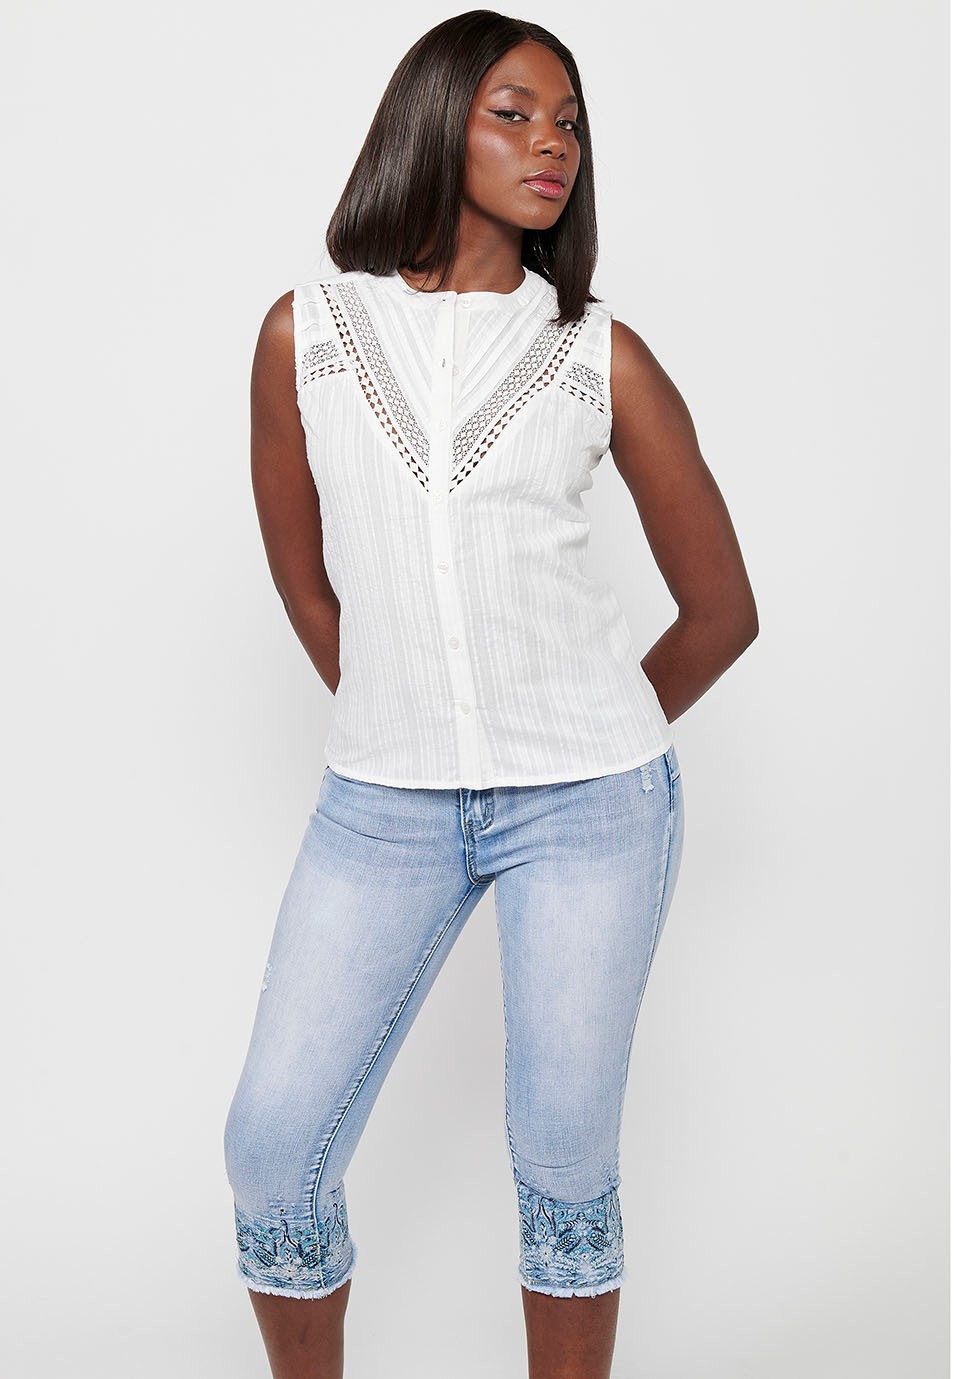 Sleeveless Cotton Blouse with Round Neck and Button Front Closure and White Embroidered Details for Women 2